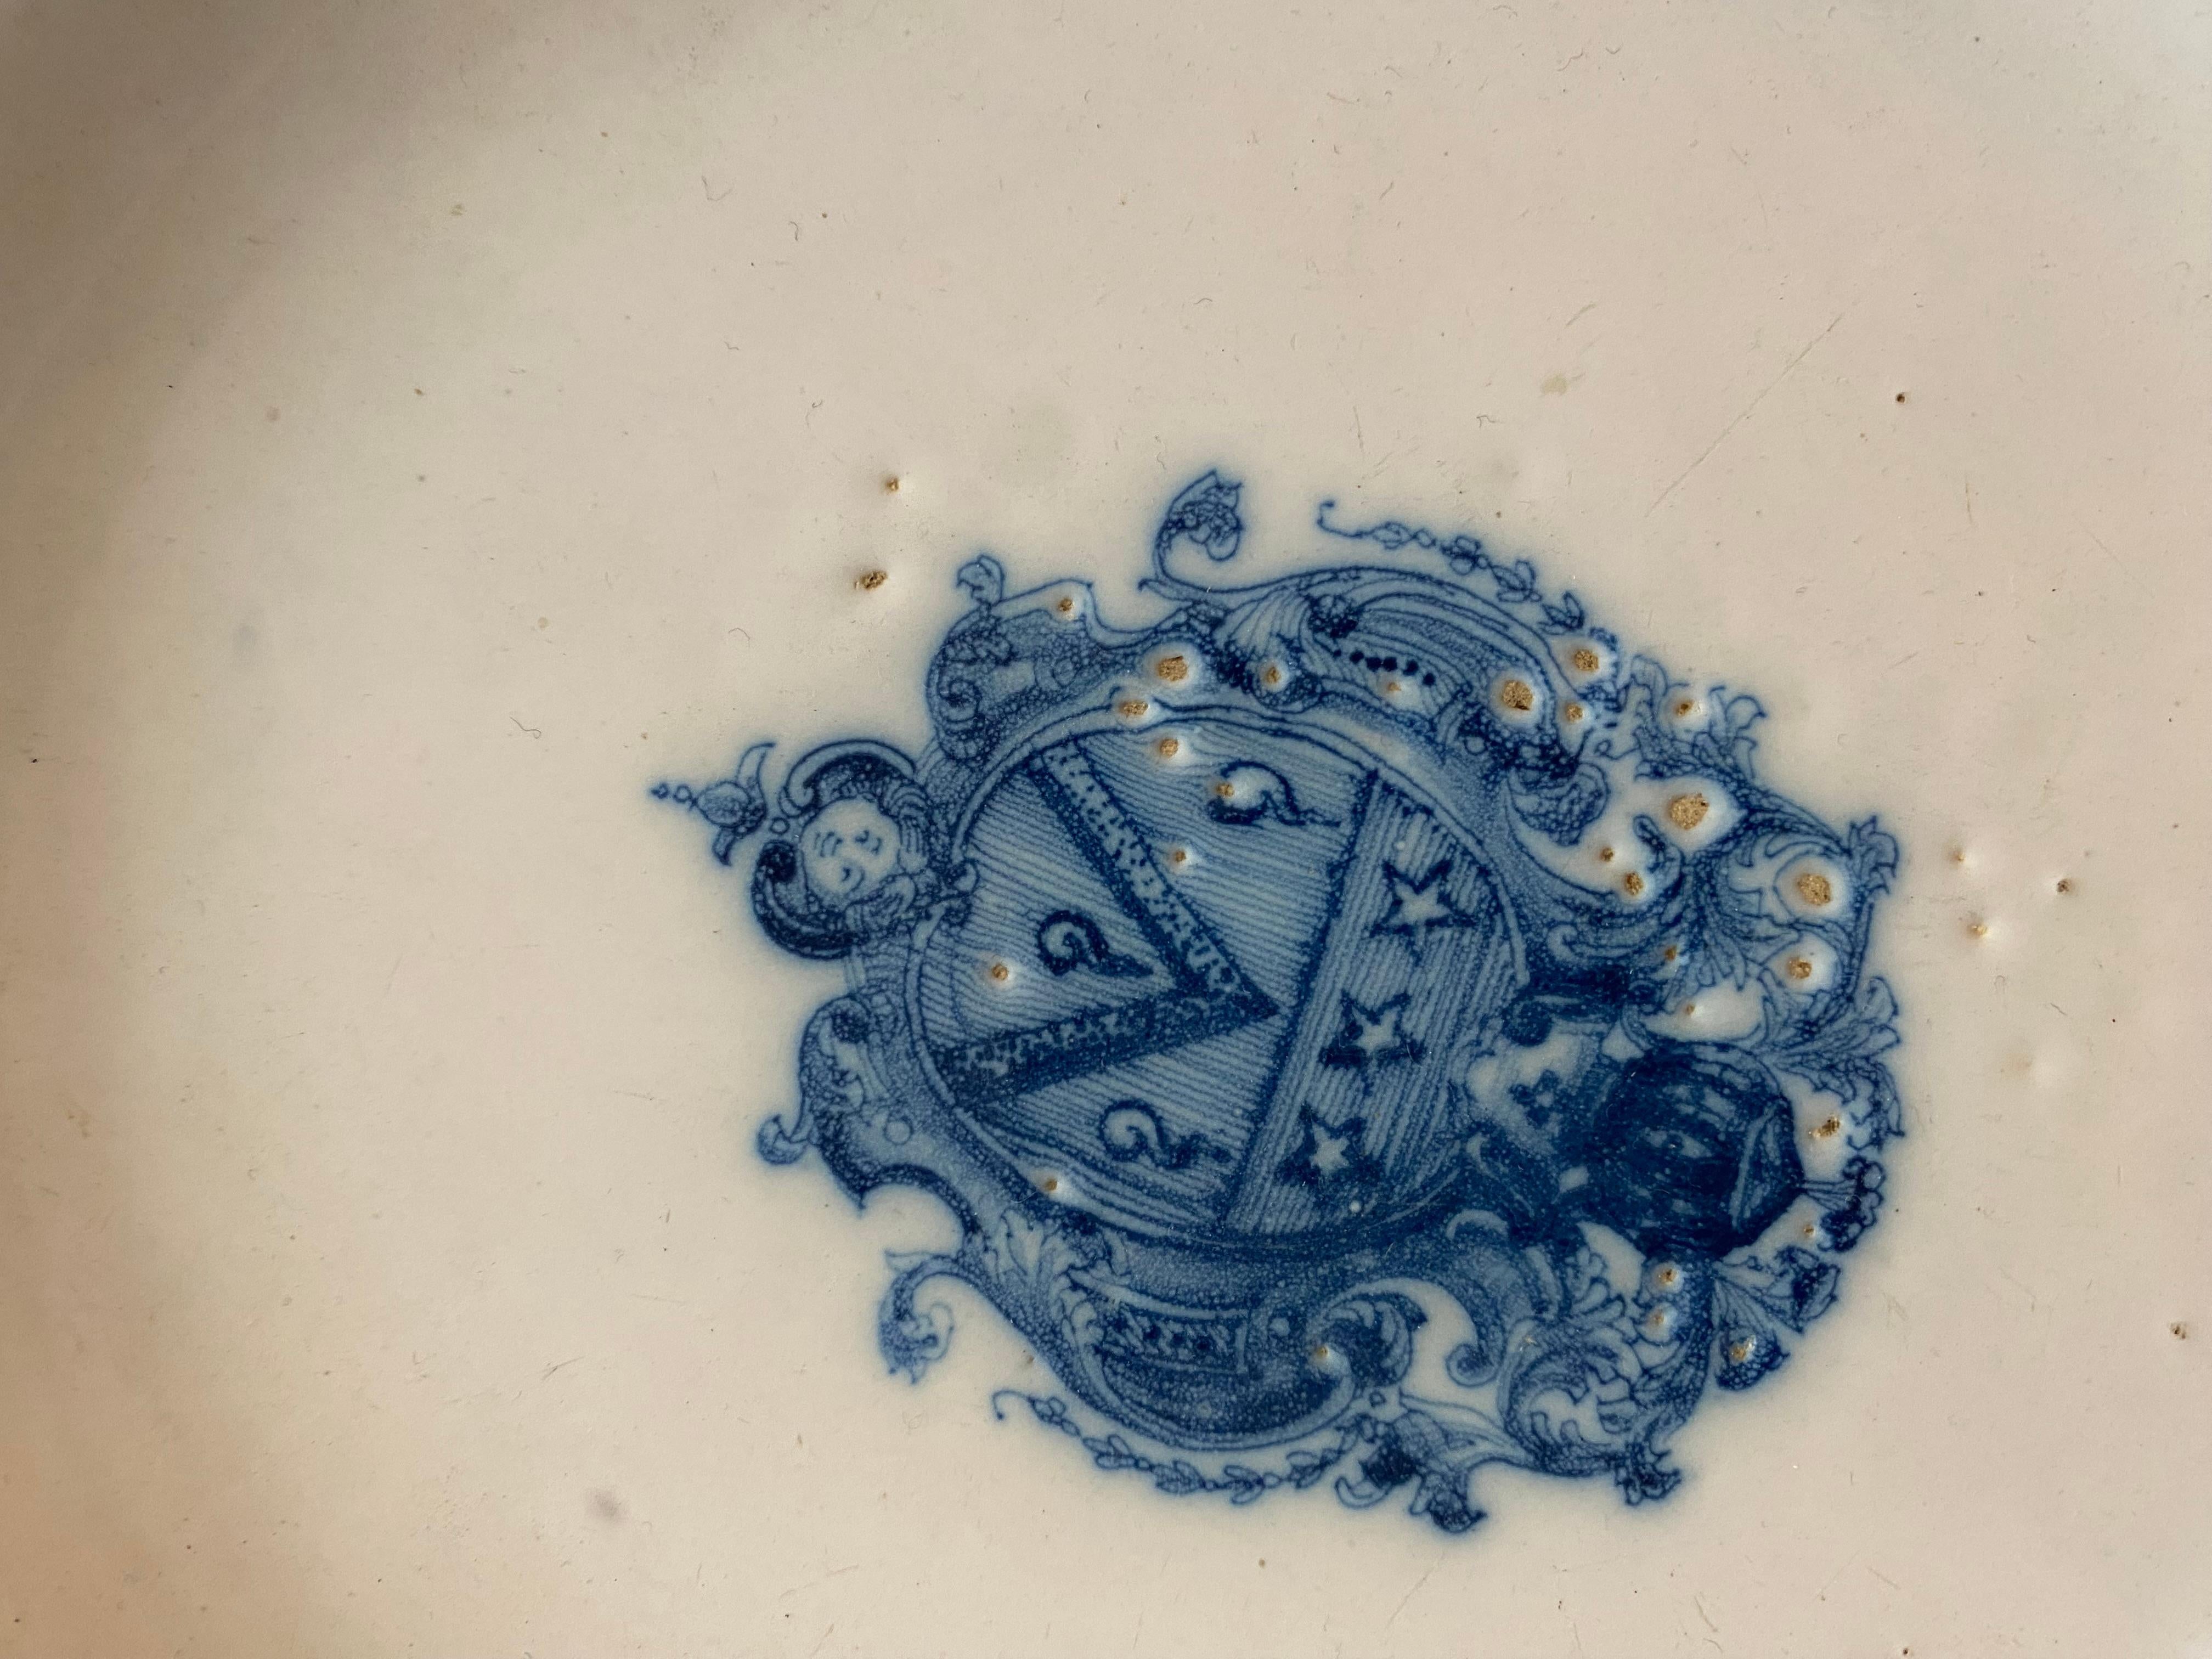 Very pretty 18th century Moustier earthenware plate with central decoration of a coat of arms in blue monochrome. The scalloped edge is decorated with a “Bérain” frieze. Perfect condition except for a few slight cooking bubbles.